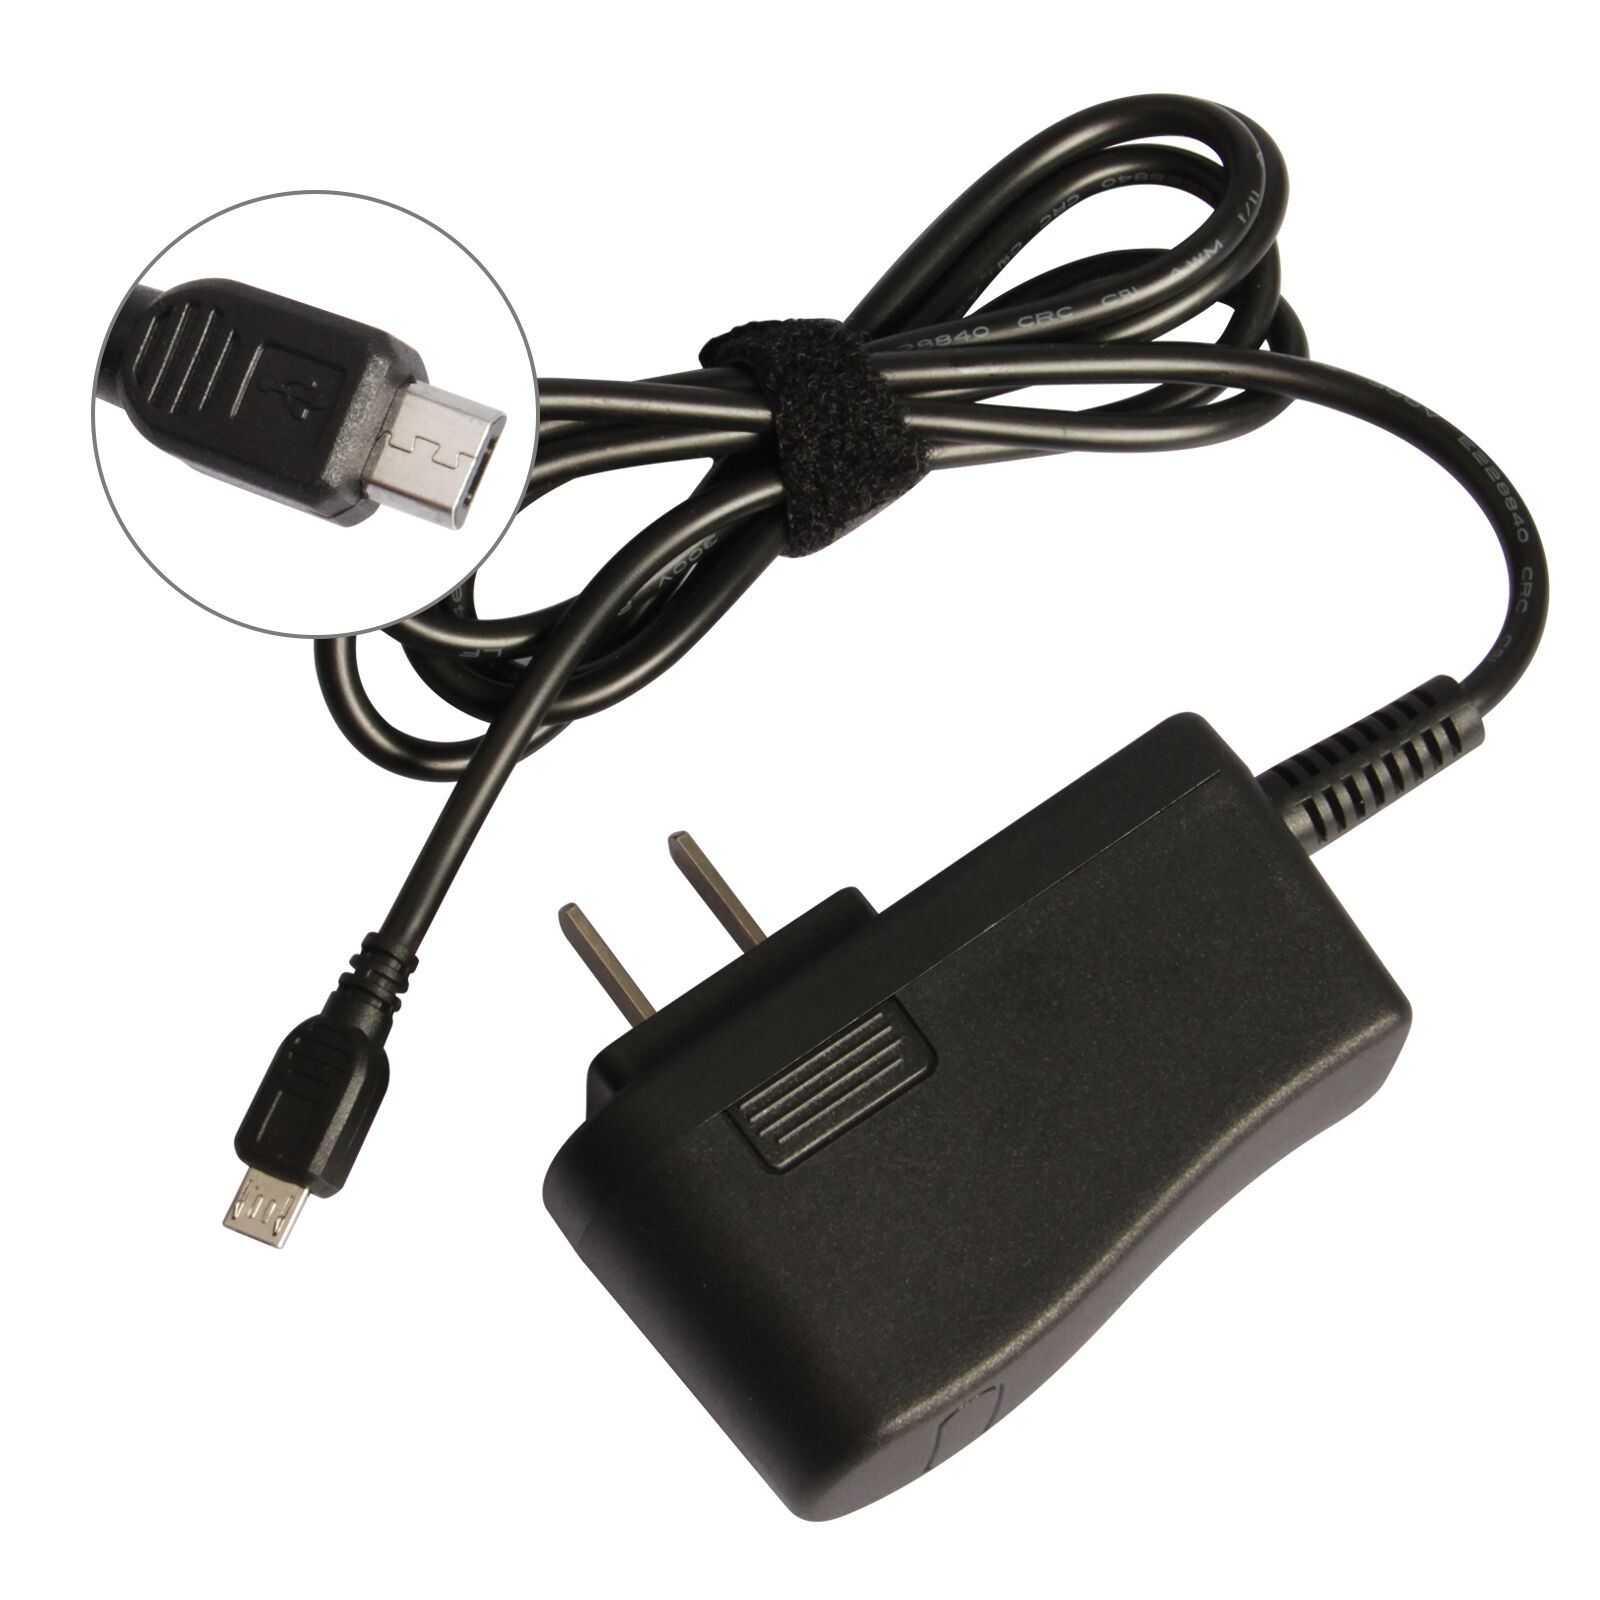 AC Adapter Charger Cord For Asus Transformer Book T100 T100TA T100TAM T100TAF Unbranded/Generic Does Not Apply